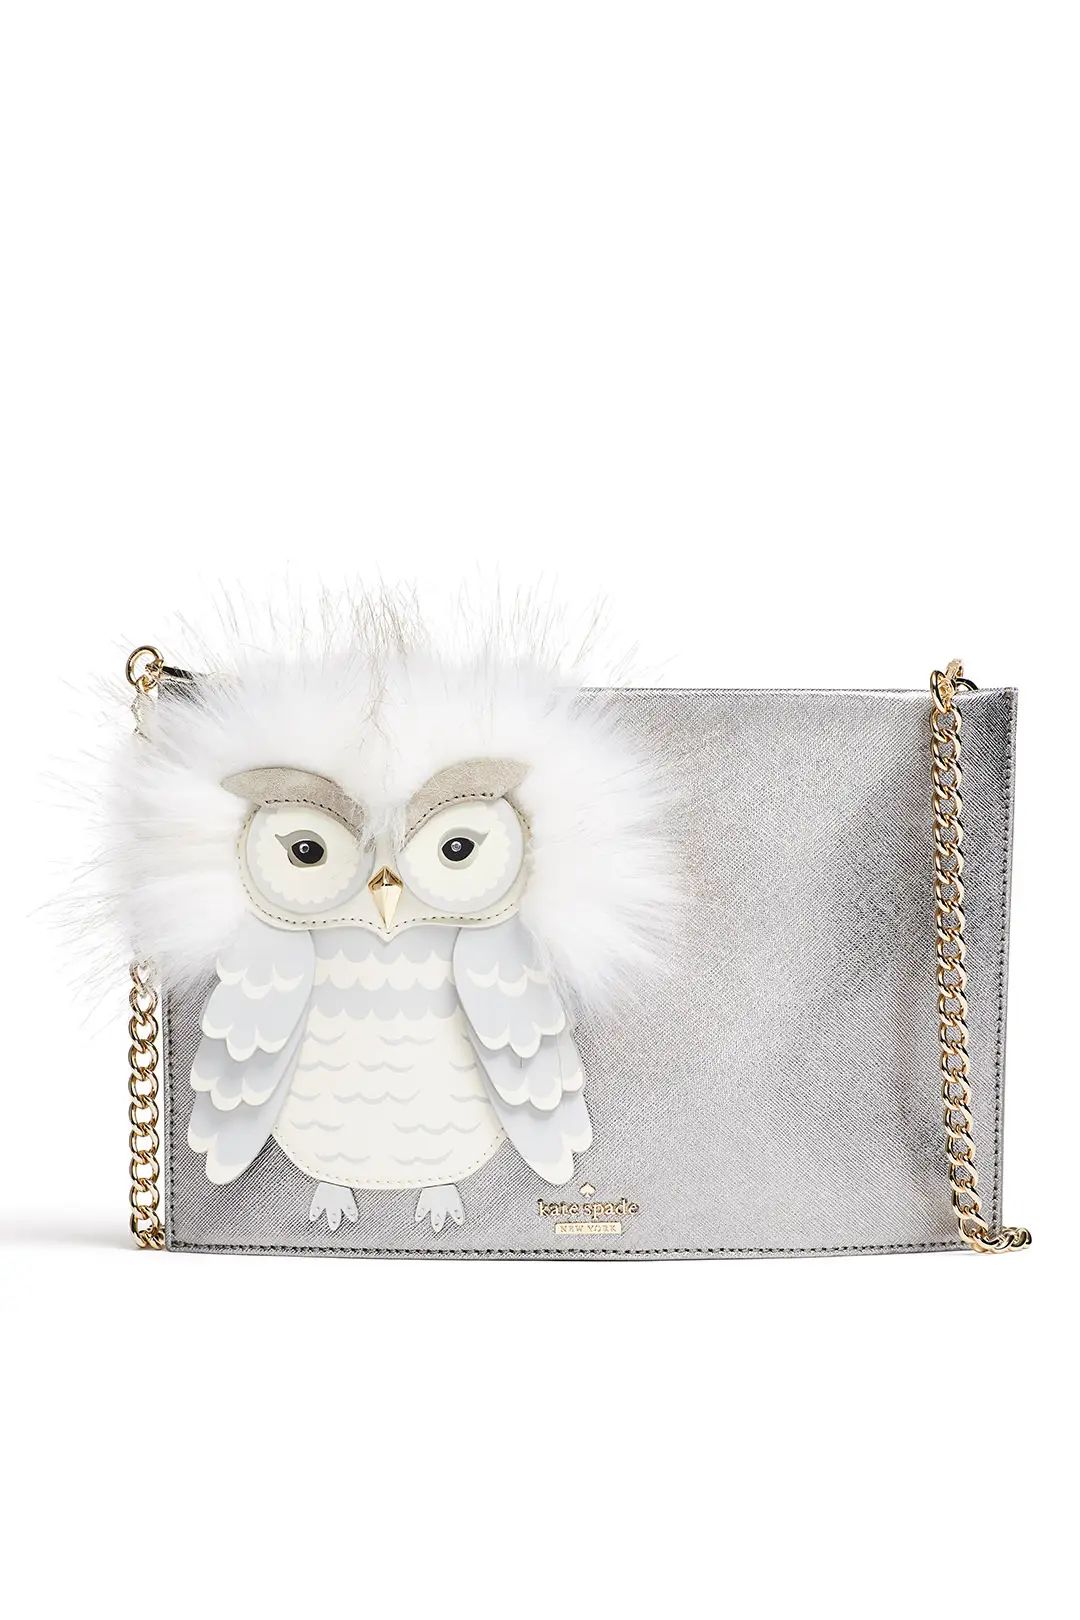 kate spade new york accessories Star Bright Owl Clutch | Rent The Runway